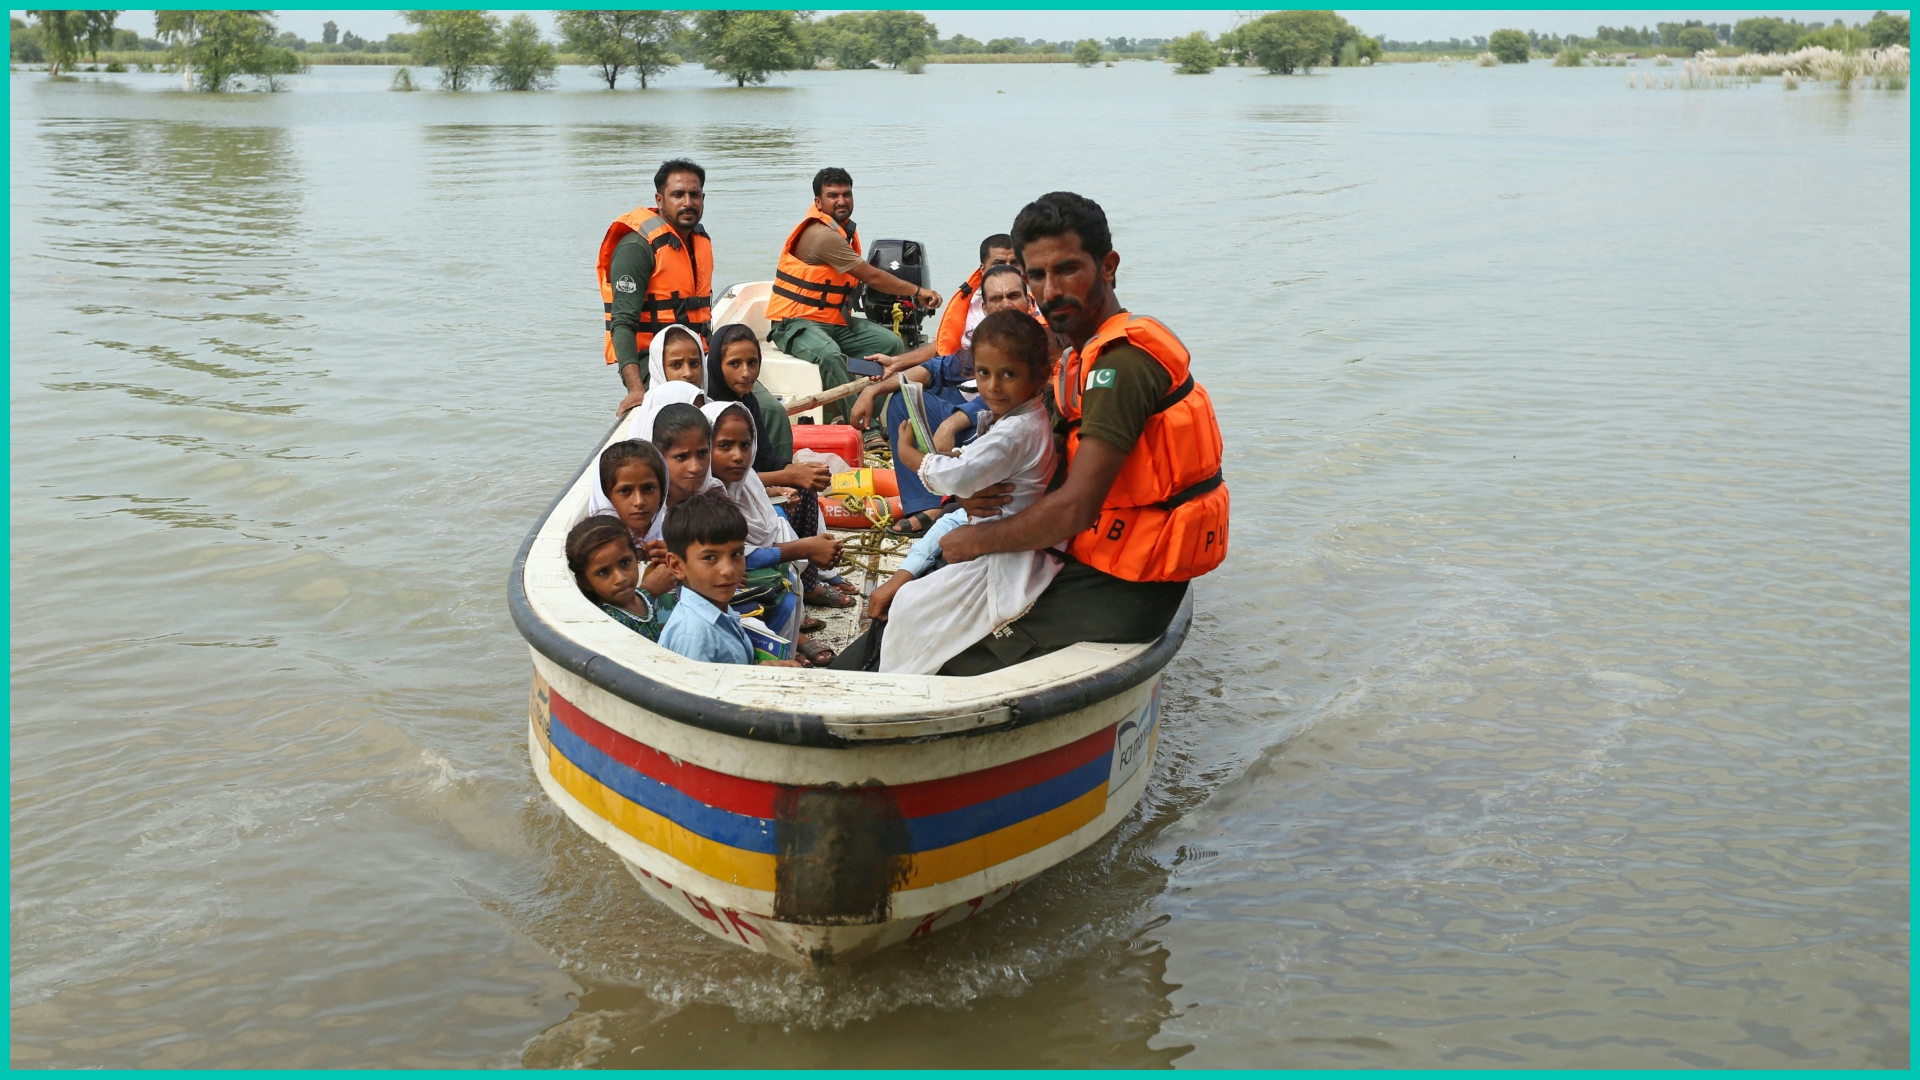  Rescue workers use a boat to drop children back home after school in a flood hit area following heavy monsoon rains in Dera Ghazi Khan district in Punjab province on August 29, 2022.